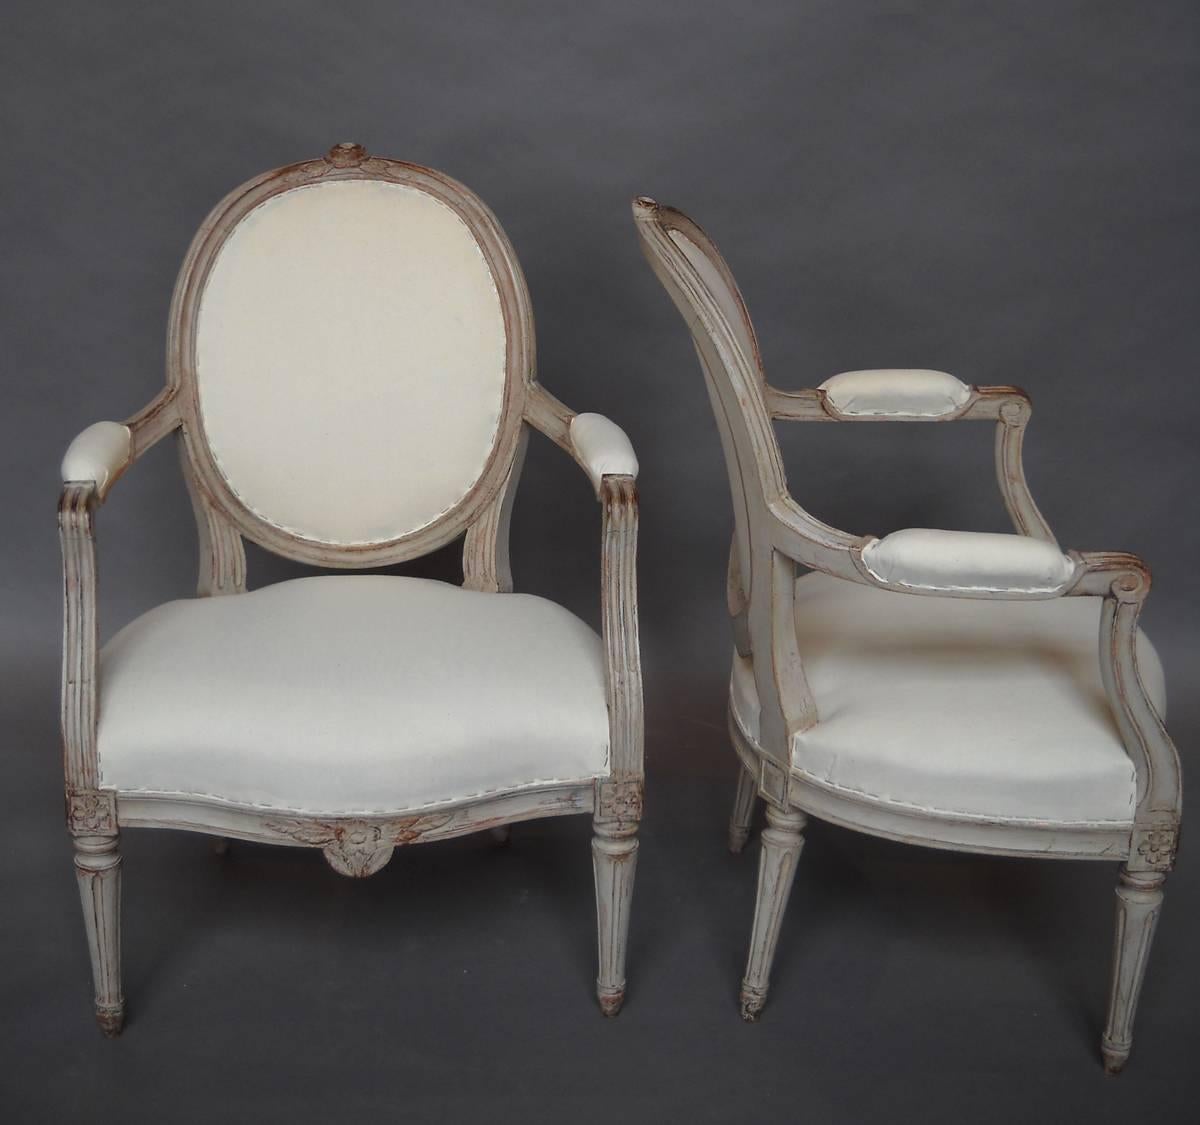 Pair of Swedish armchairs, circa 1890, in the Gustavian style. Carved rose with foliage on the crest and apron with fluted arms continuing to the carved corner blocks. Turned tapering legs. Sturdy and comfortable.